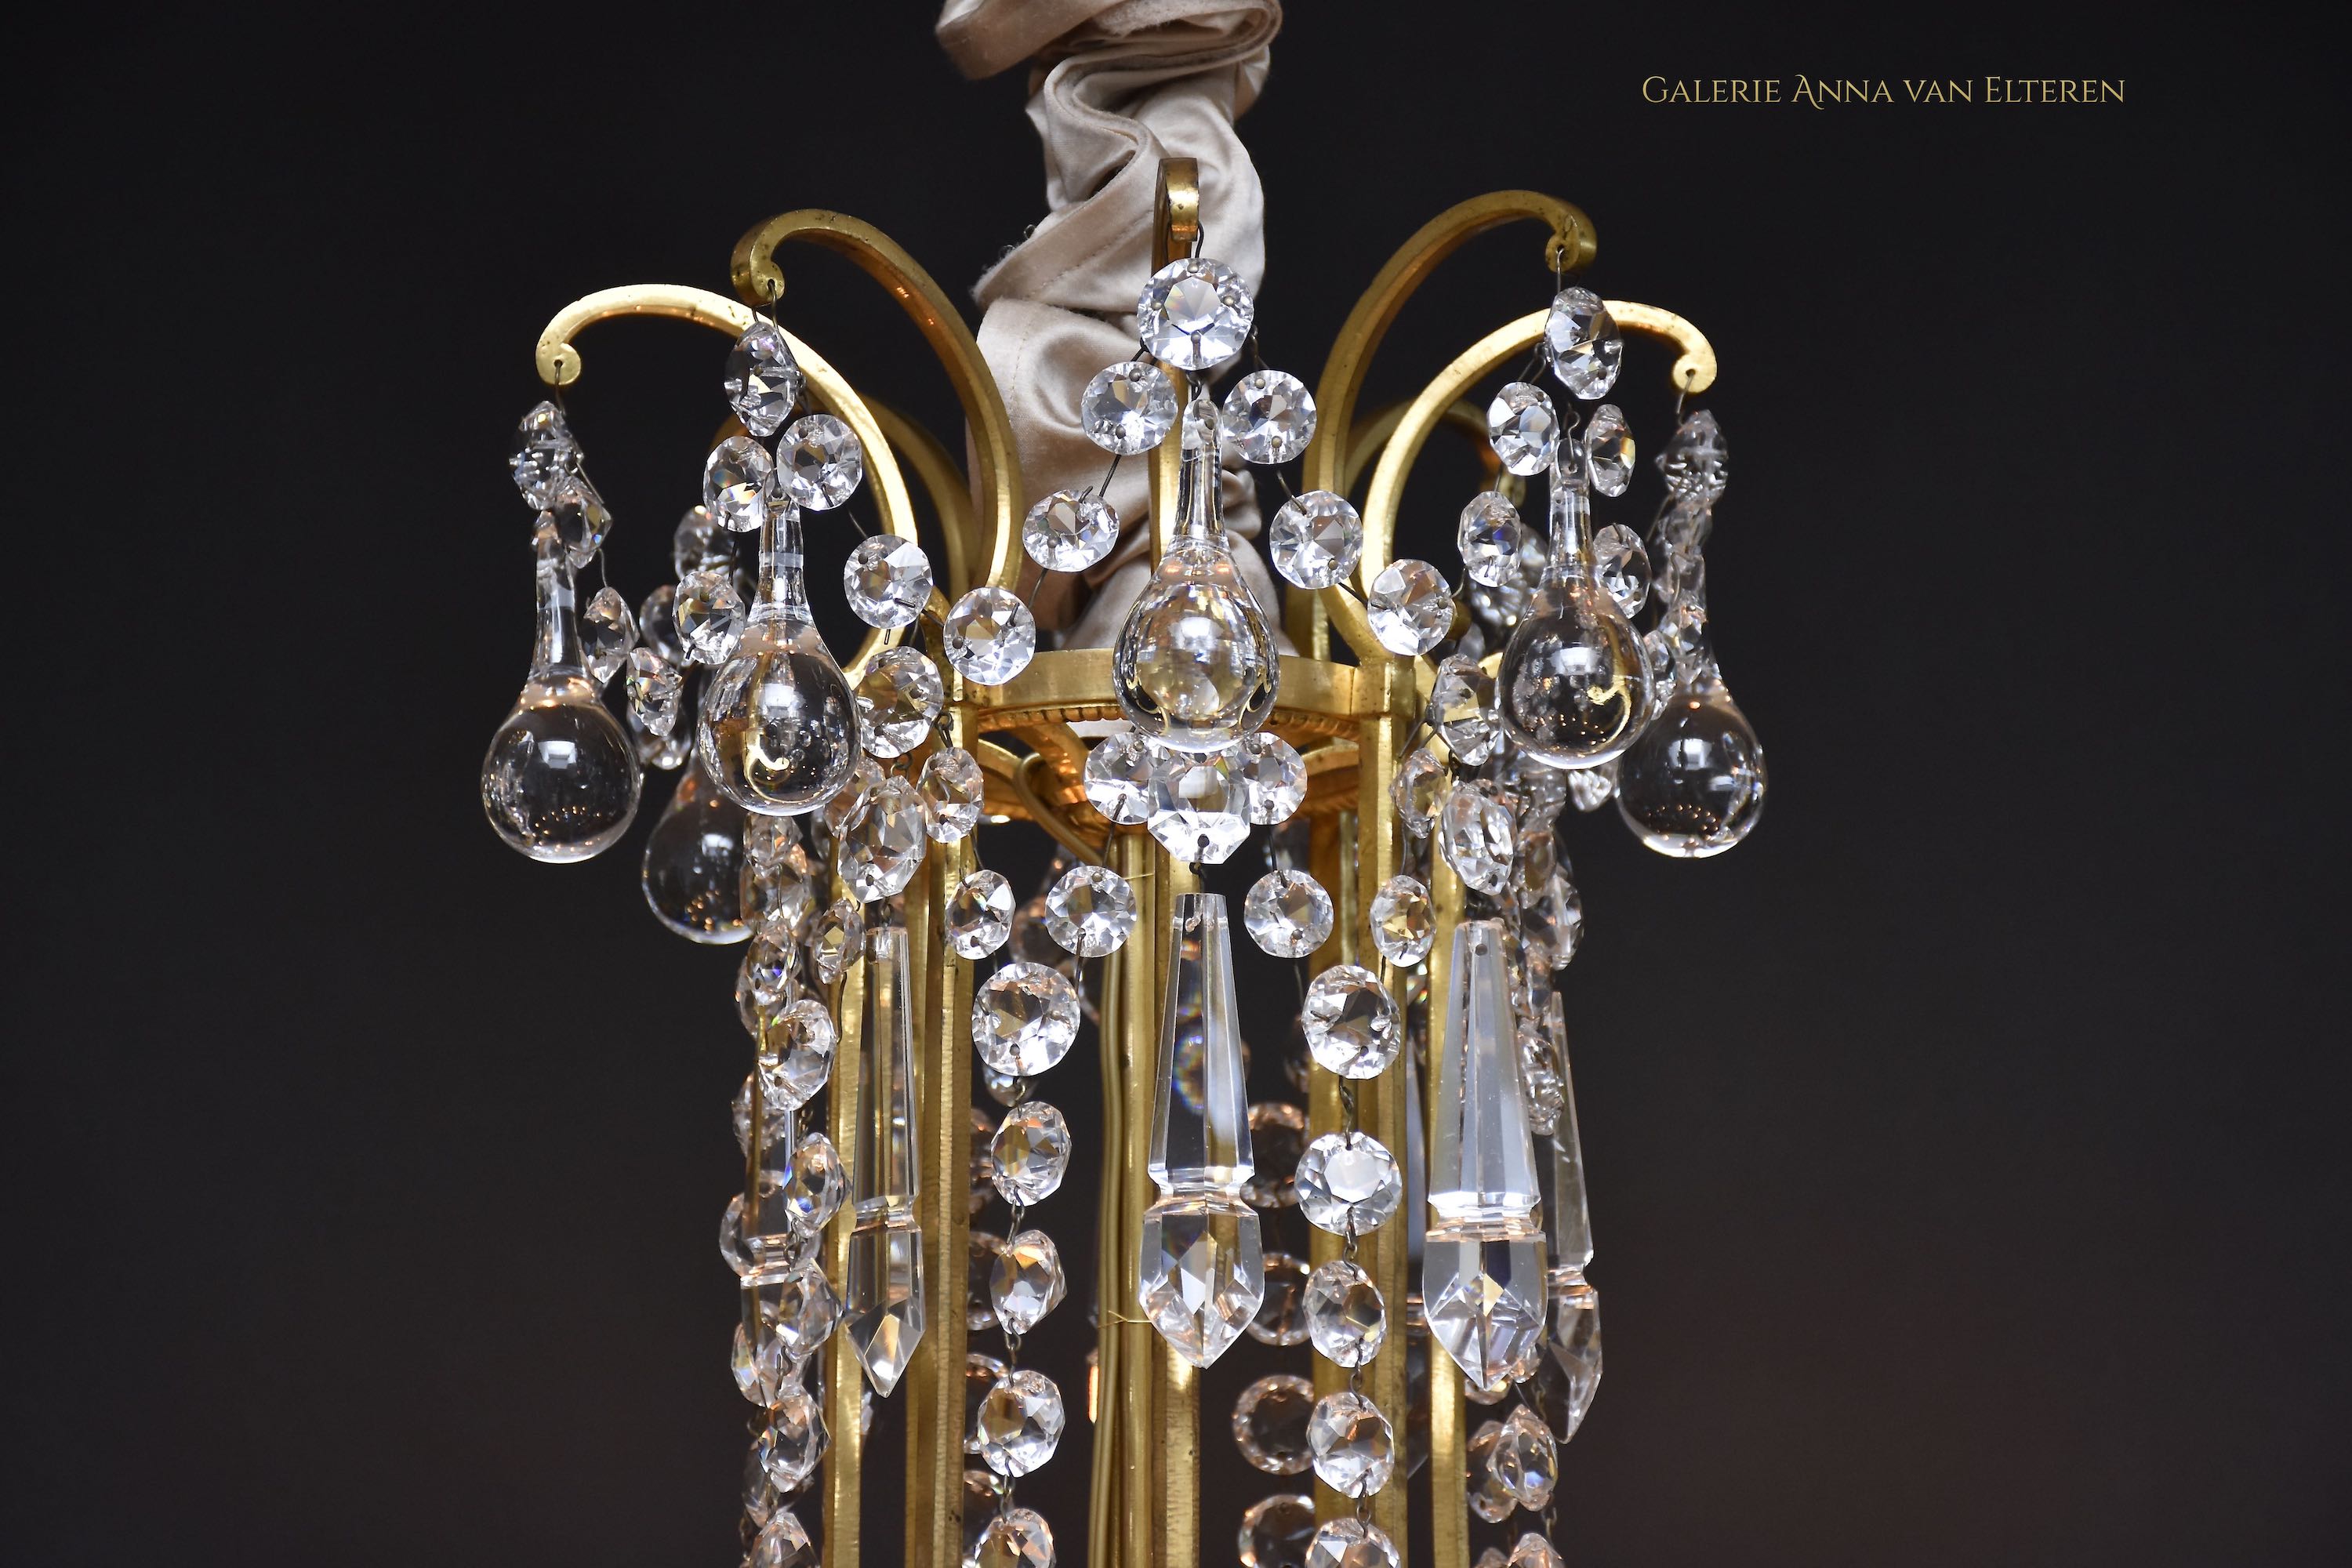 Large gilt bronze French Baccarat chandelier